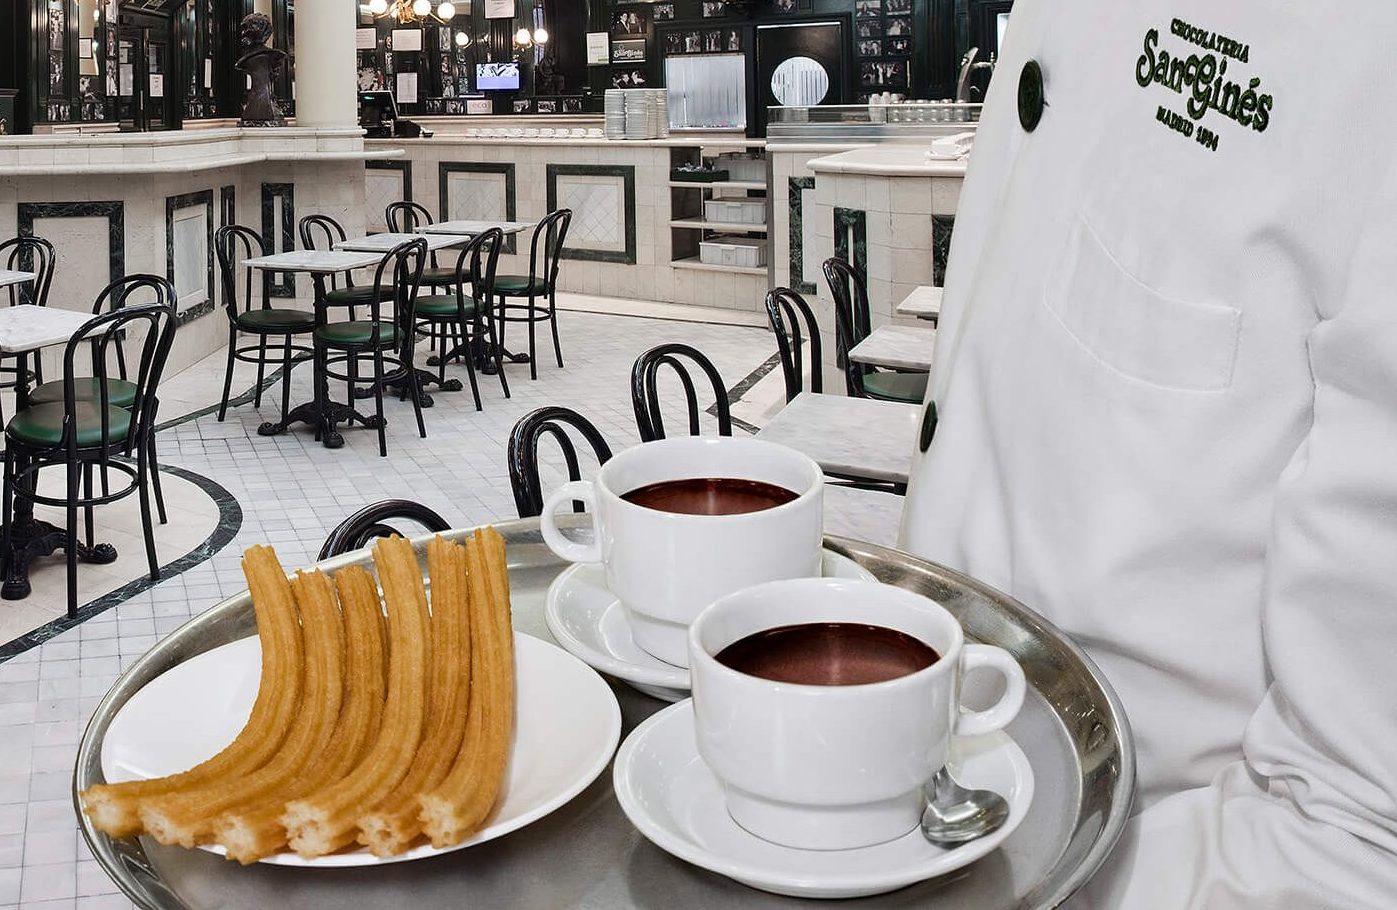 A server in white holds a tray with hot chocolate and churros, with an empty restaurant dining room in the background.